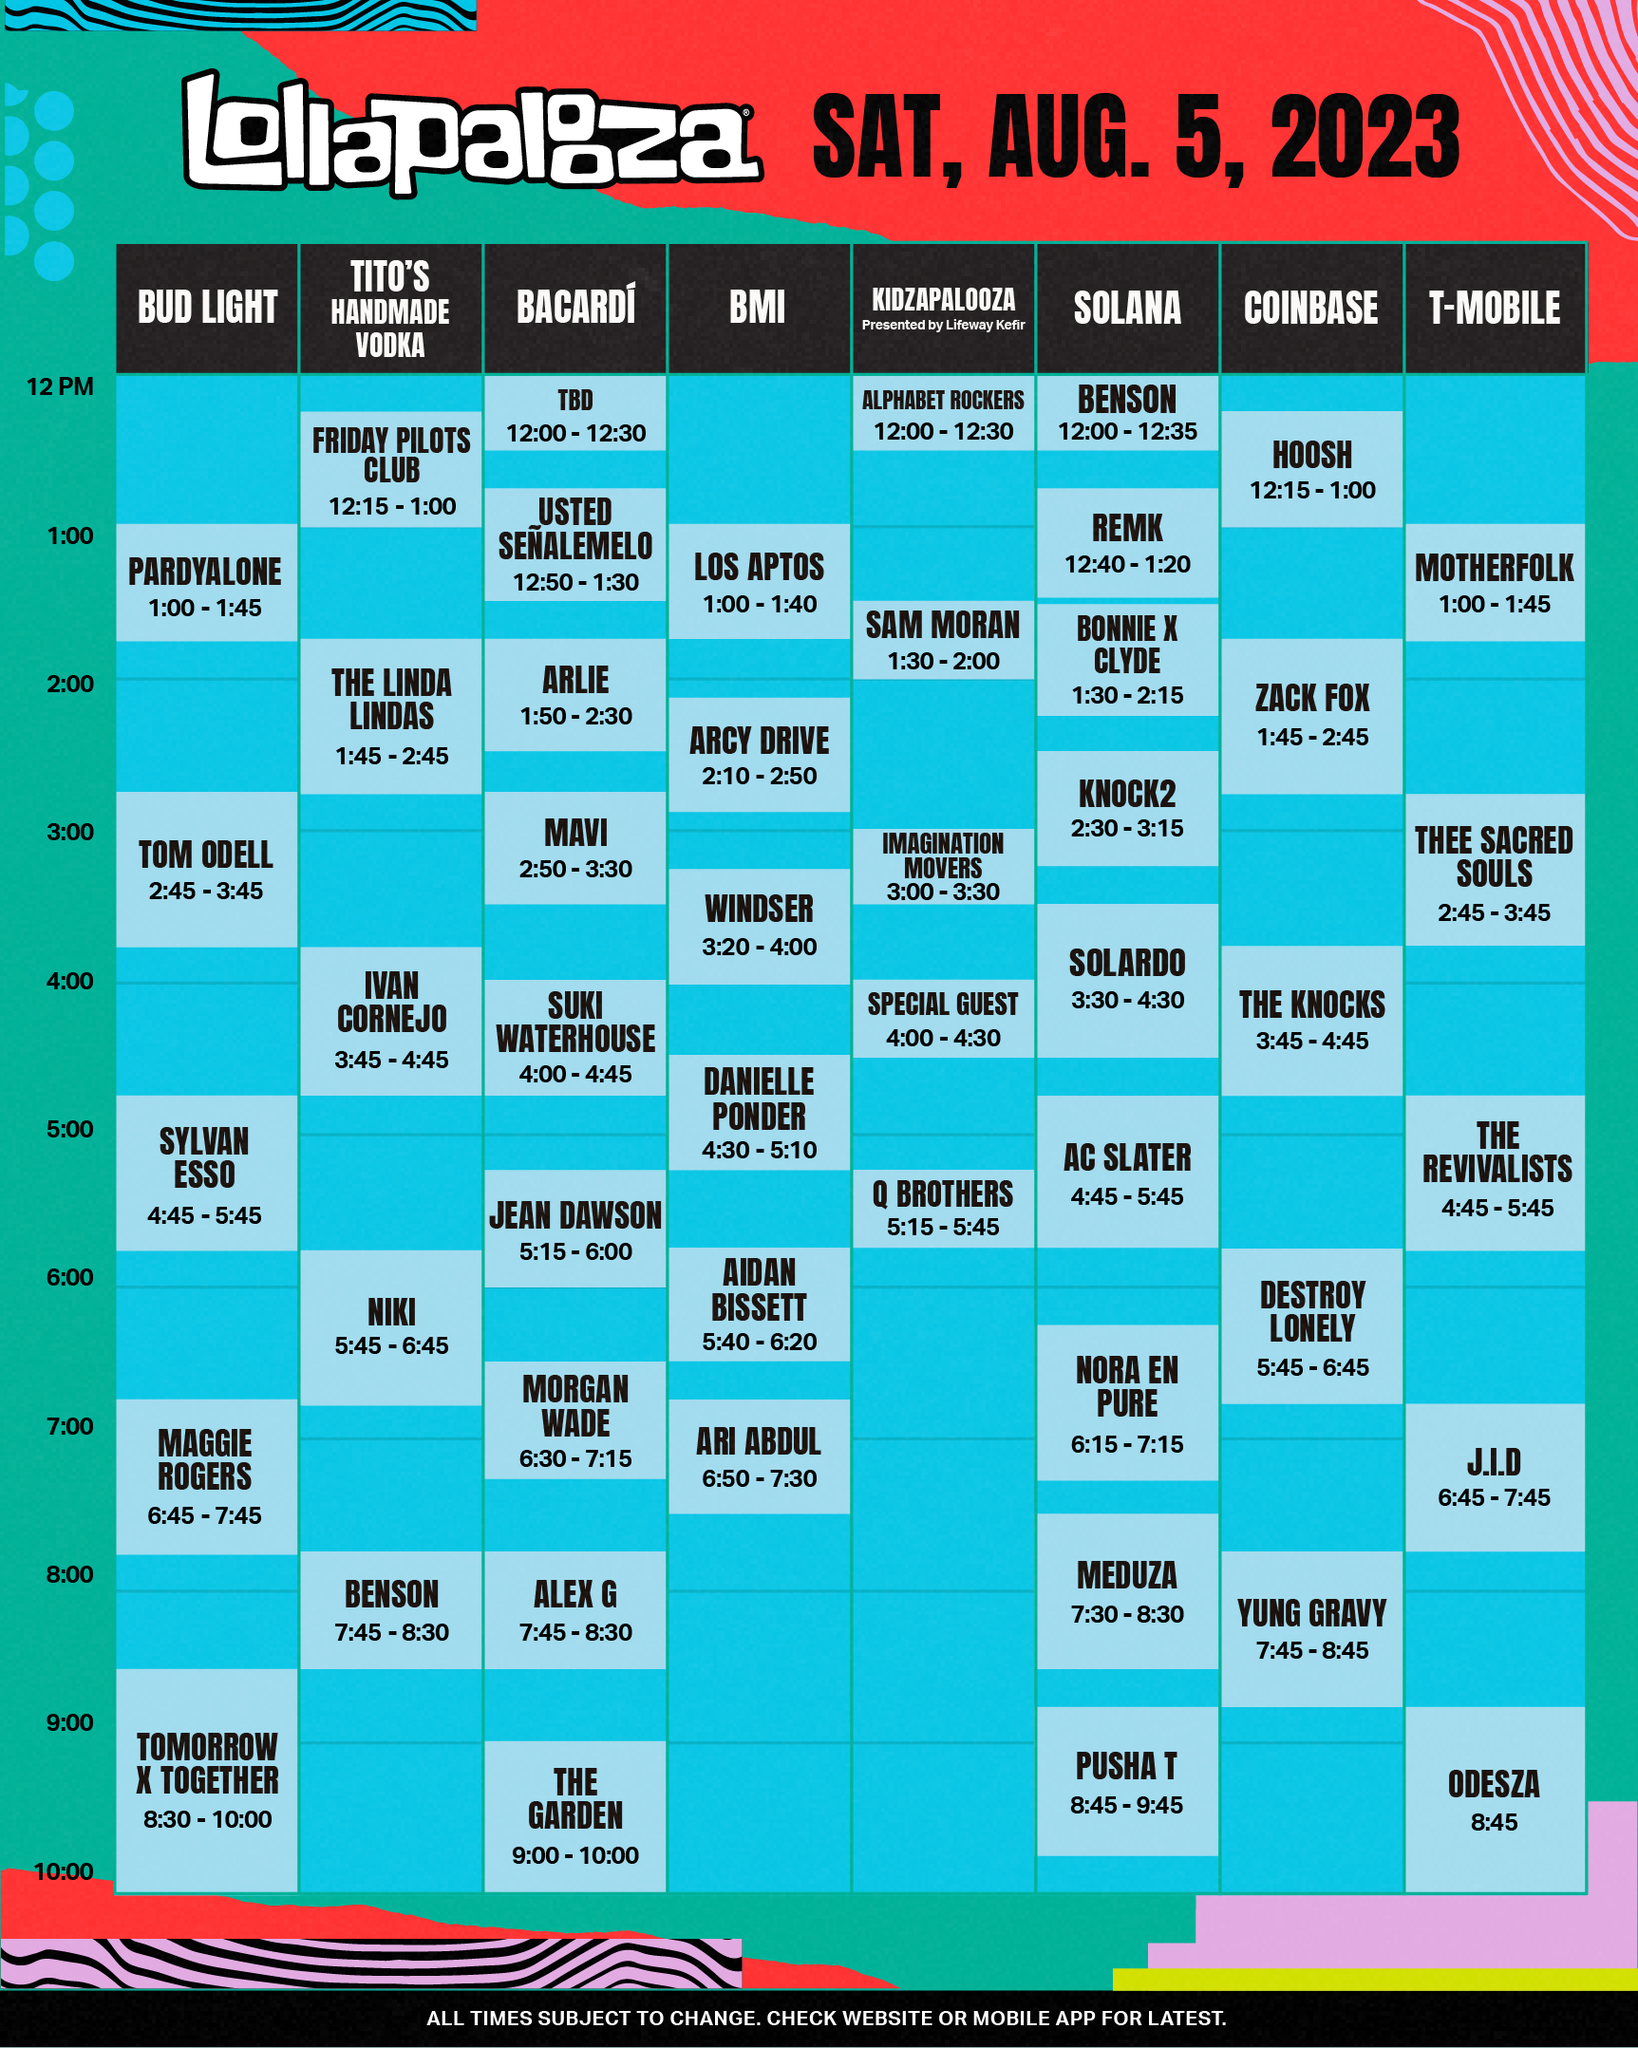 2023 Lollapalooza Schedule Announced! 3